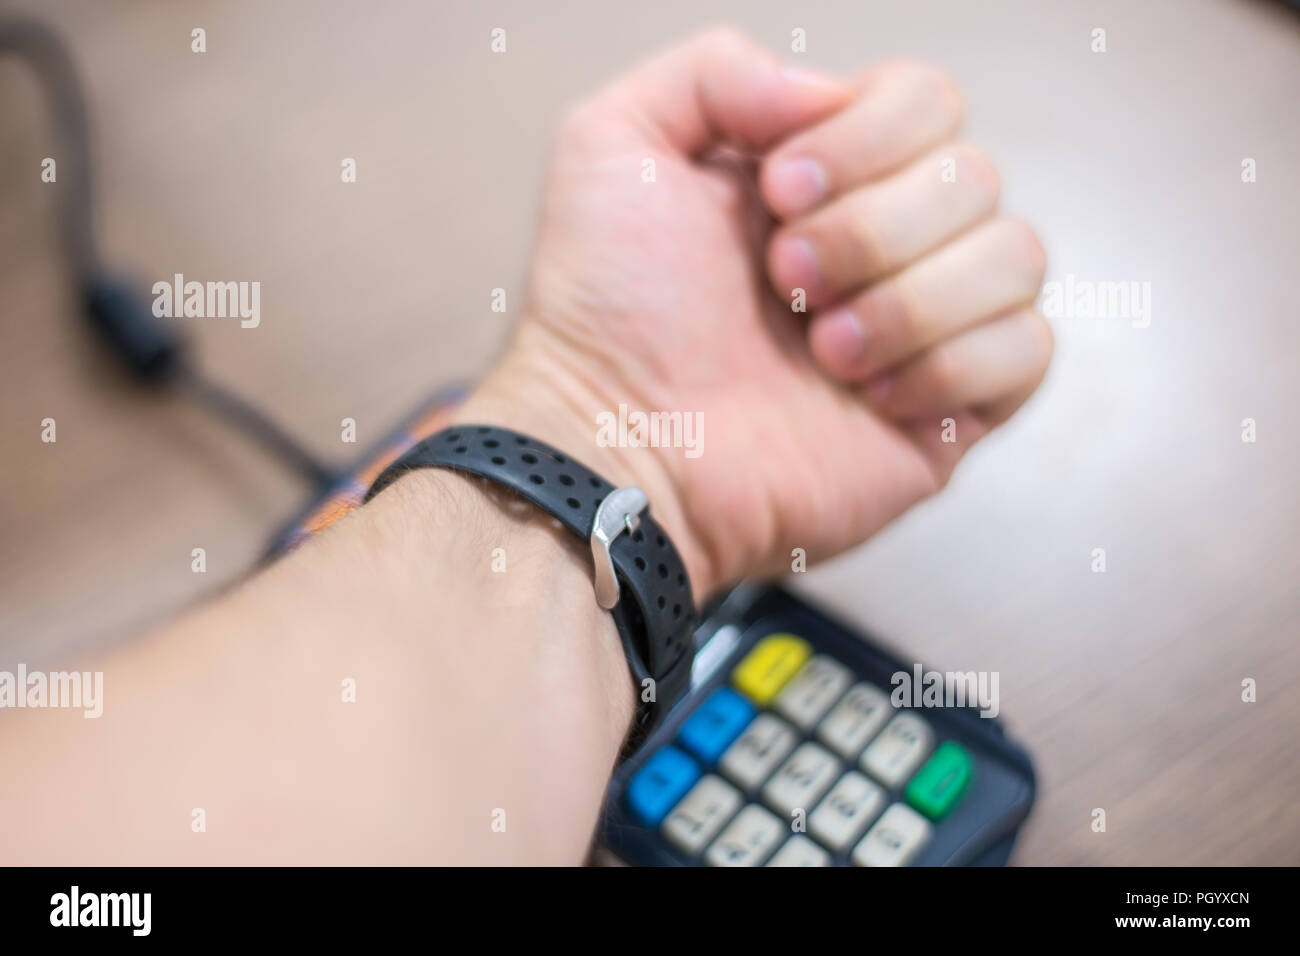 Contact less payment. Paying with smart bracelet. Payment system on wearable bracelet devices concept. Stock Photo